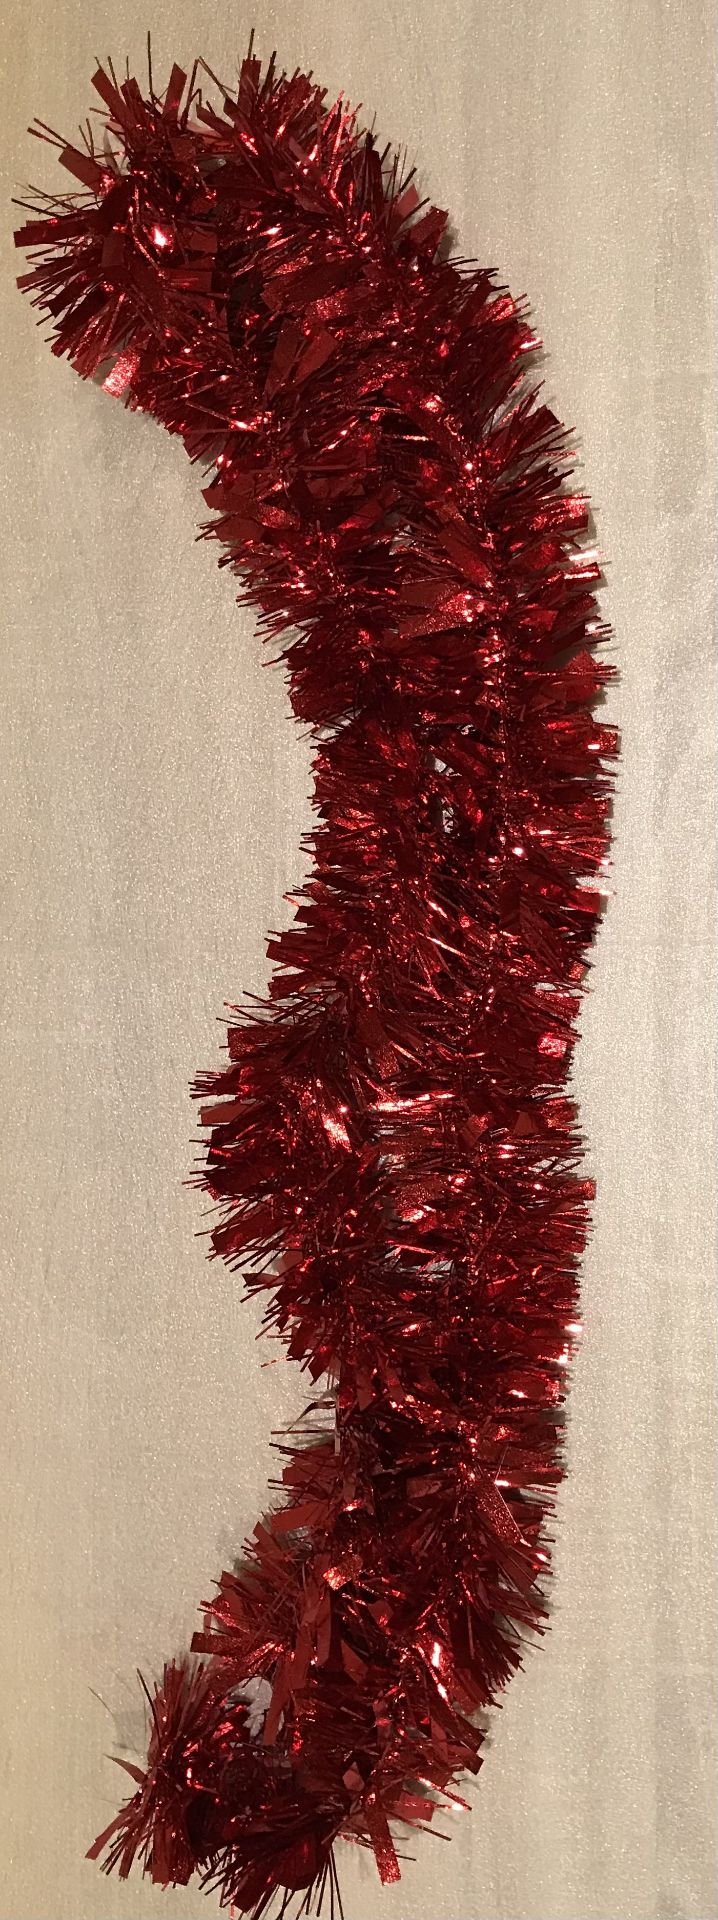 500 X Luxury Tinsel 1.8M 5 Colours Gold, Silver, Red, Blue, Green - Image 4 of 6